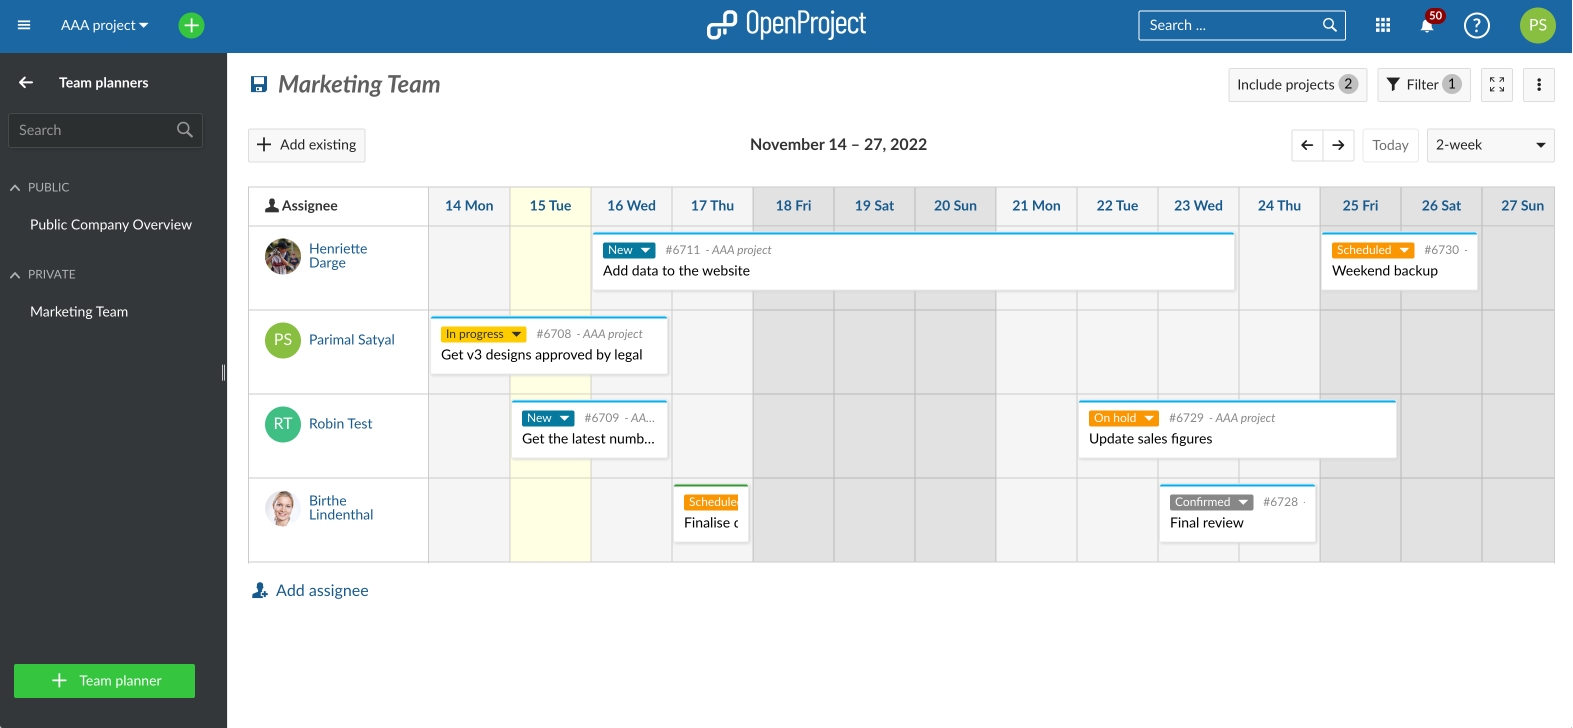 Example team planner showing a two-week view of work packages assigned to team members